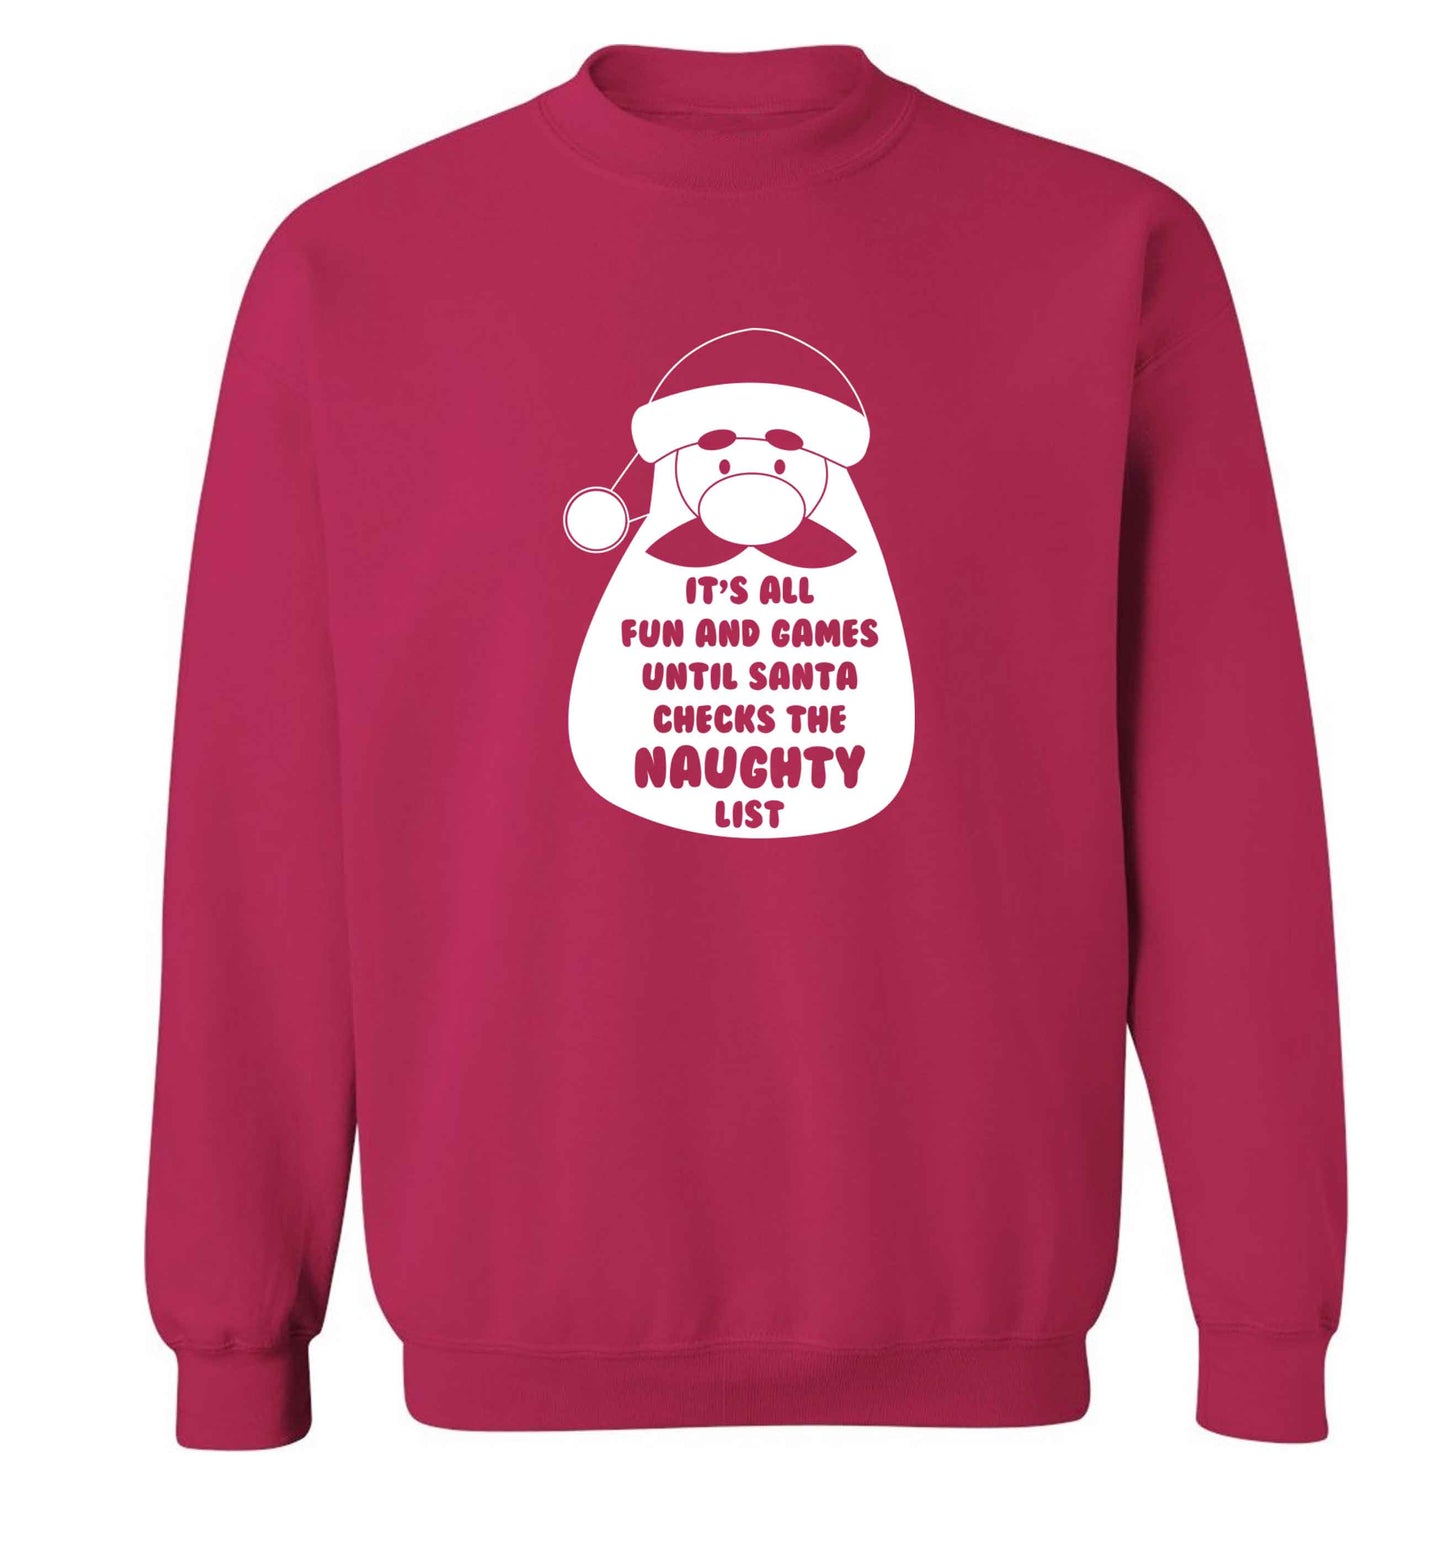 It's all fun and games until Santa checks the naughty list adult's unisex pink sweater 2XL